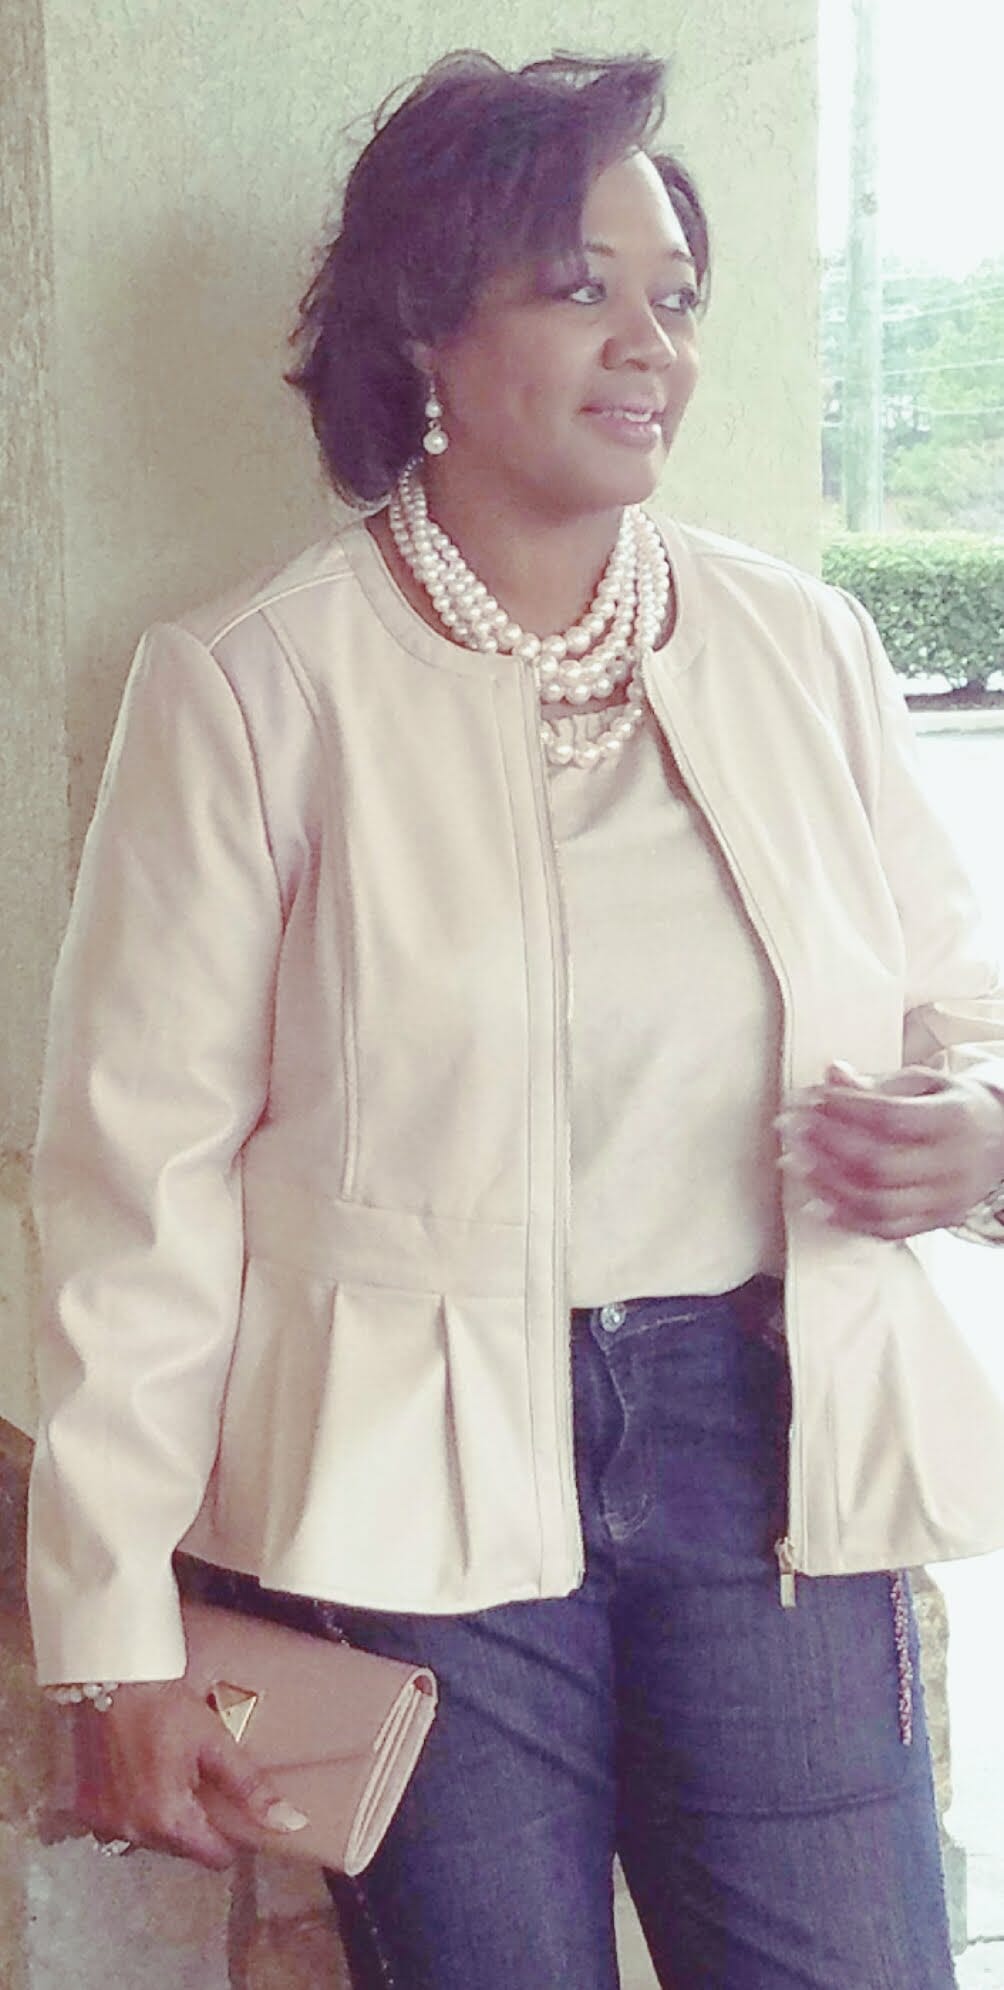 A Midnight Velvet customer in a blush top and peplum jacket set, jeans, a pearl necklace, and holding a blush clutch.